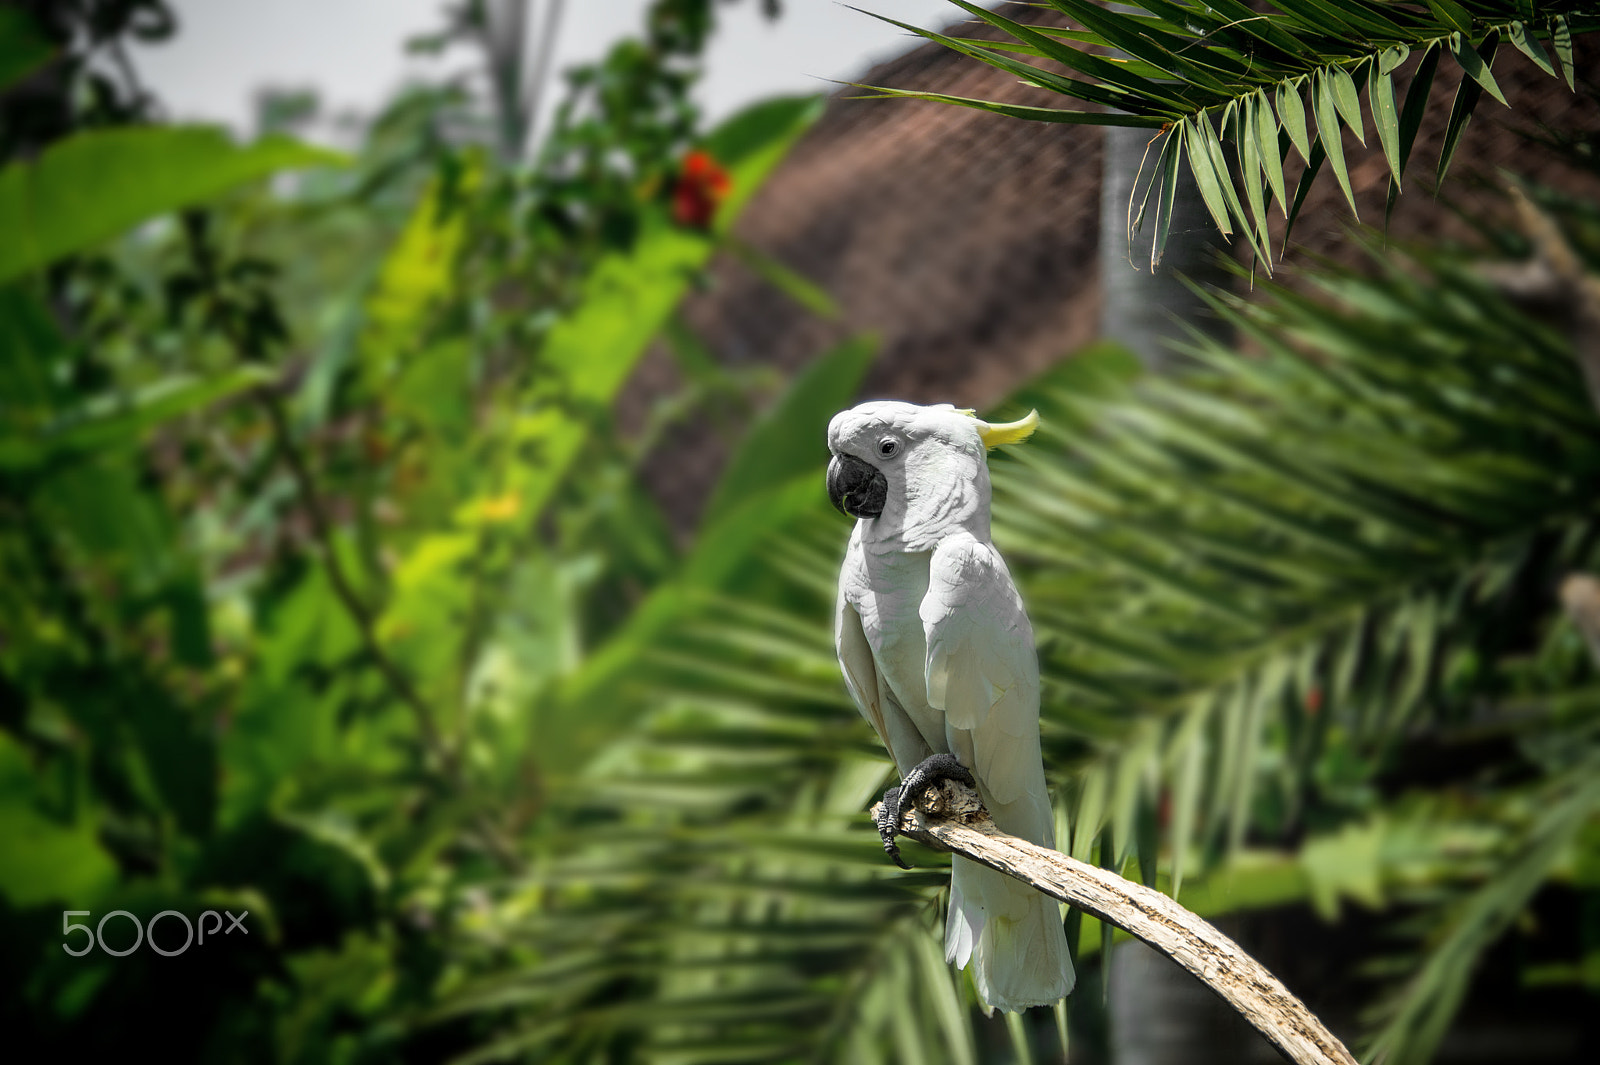 Nikon D4 sample photo. A large white cockatoo in the tropical green forest photography